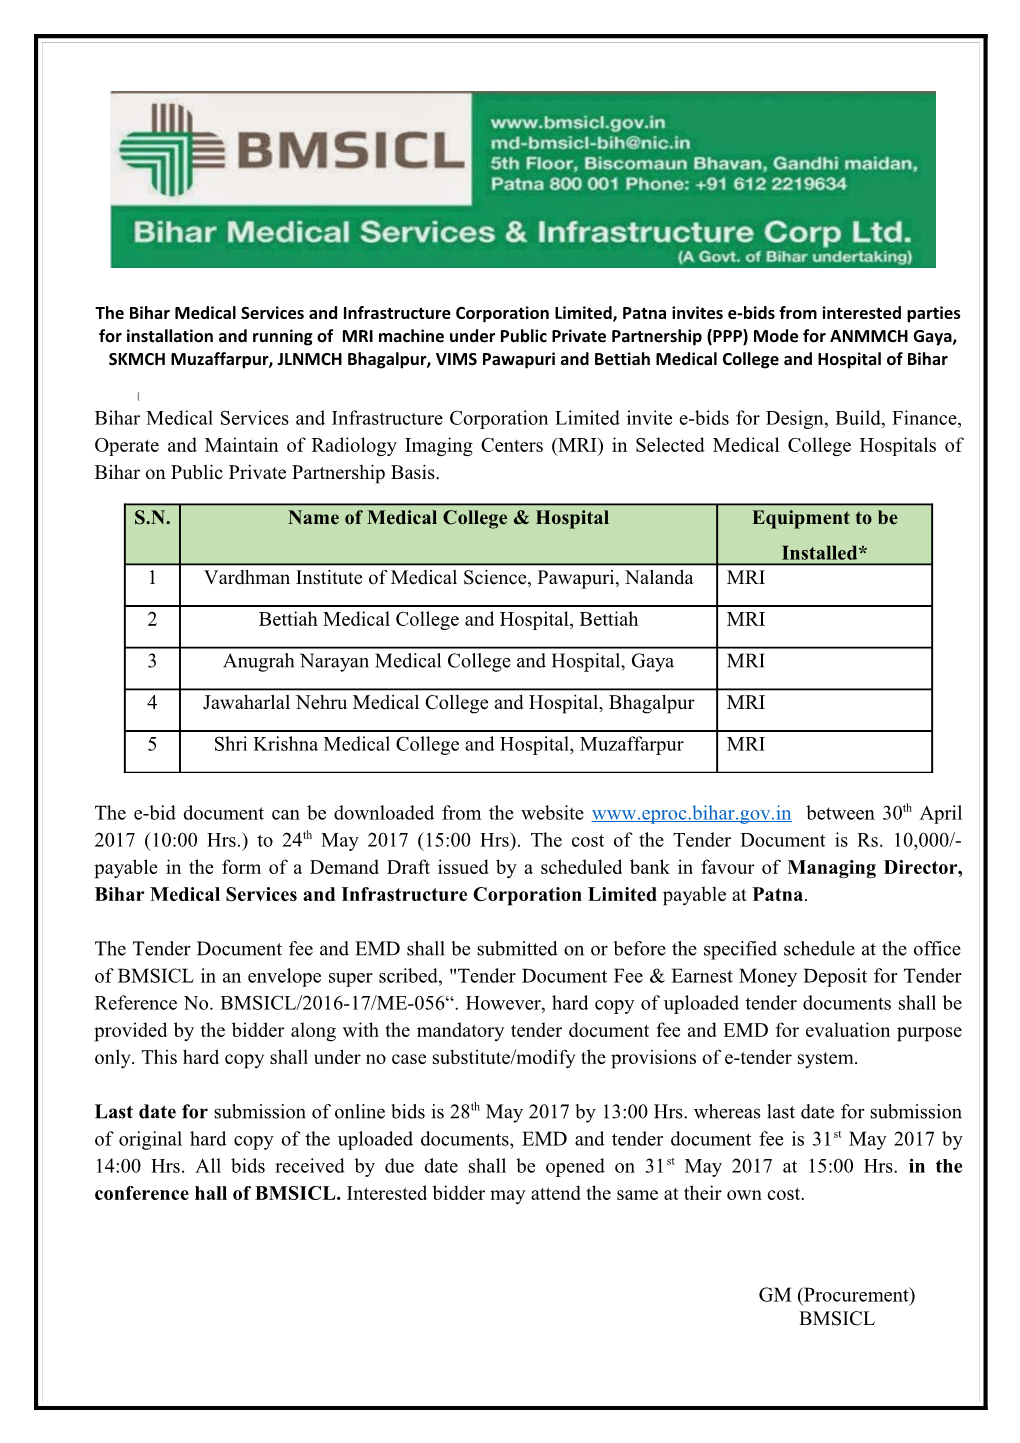 The Bihar Medical Services and Infrastructure Corporation Limited, Patna Invites E-Bids